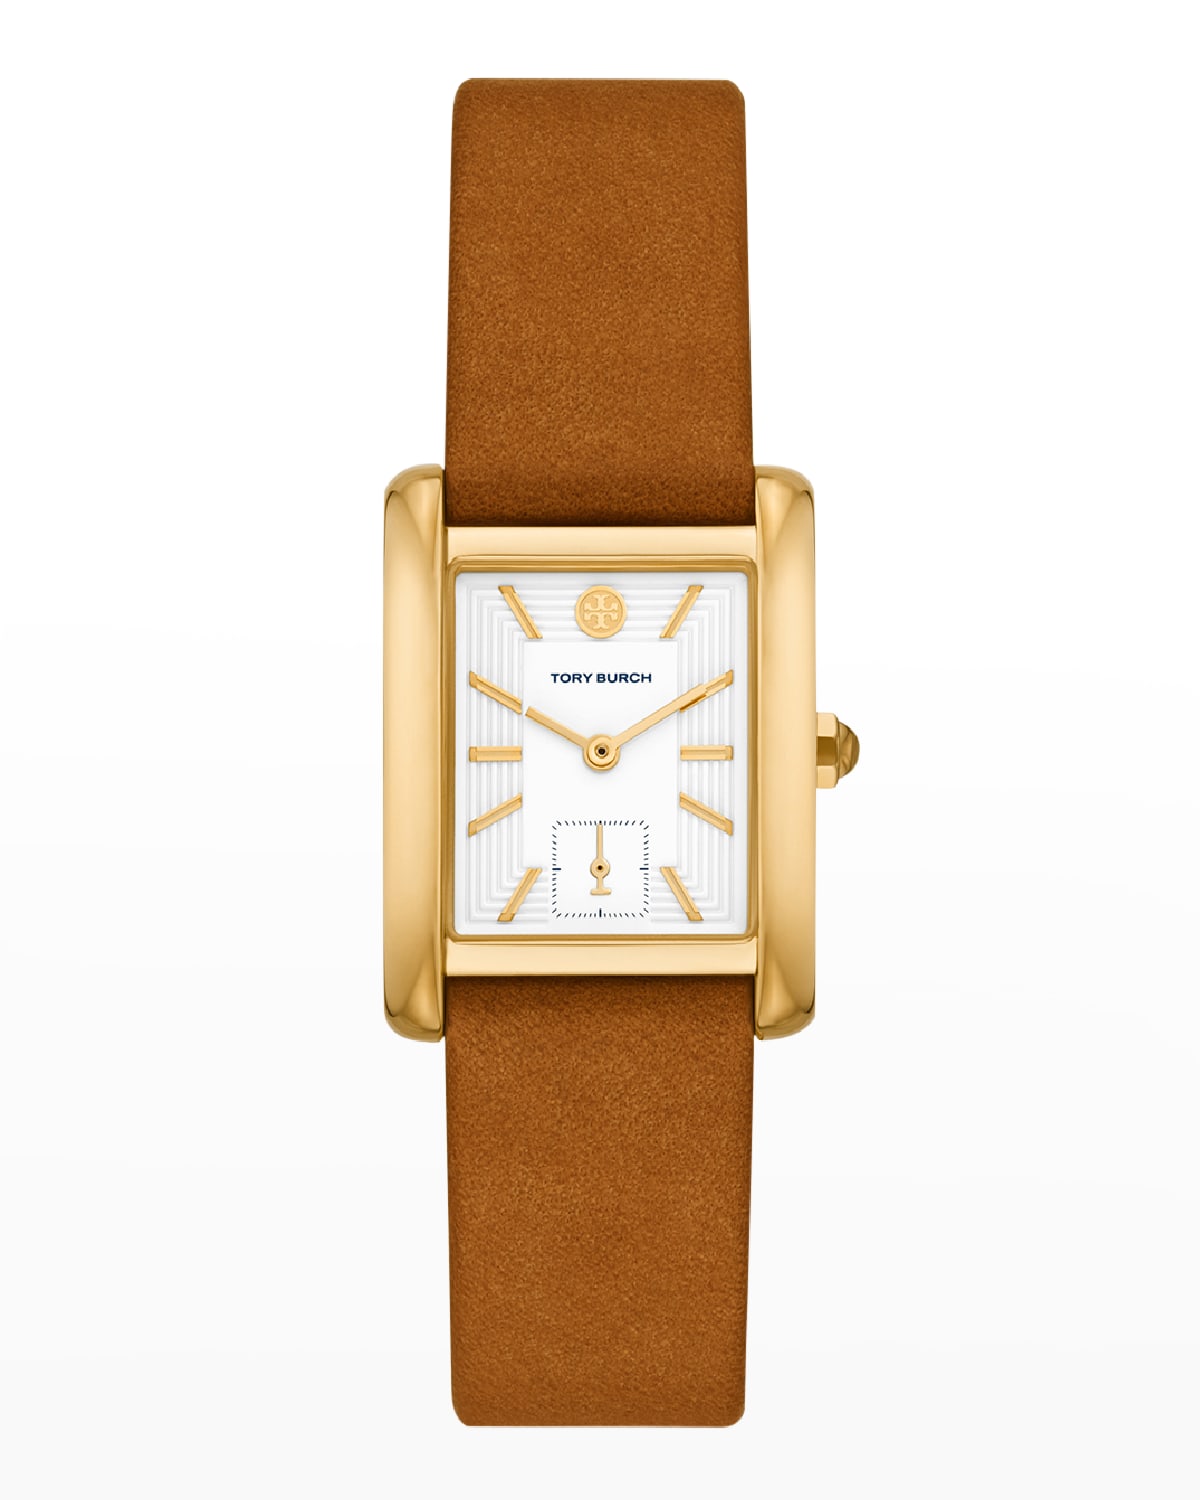 TORY BURCH THE ELEANOR WATCH WITH LUGGAGE LEATHER STRAP